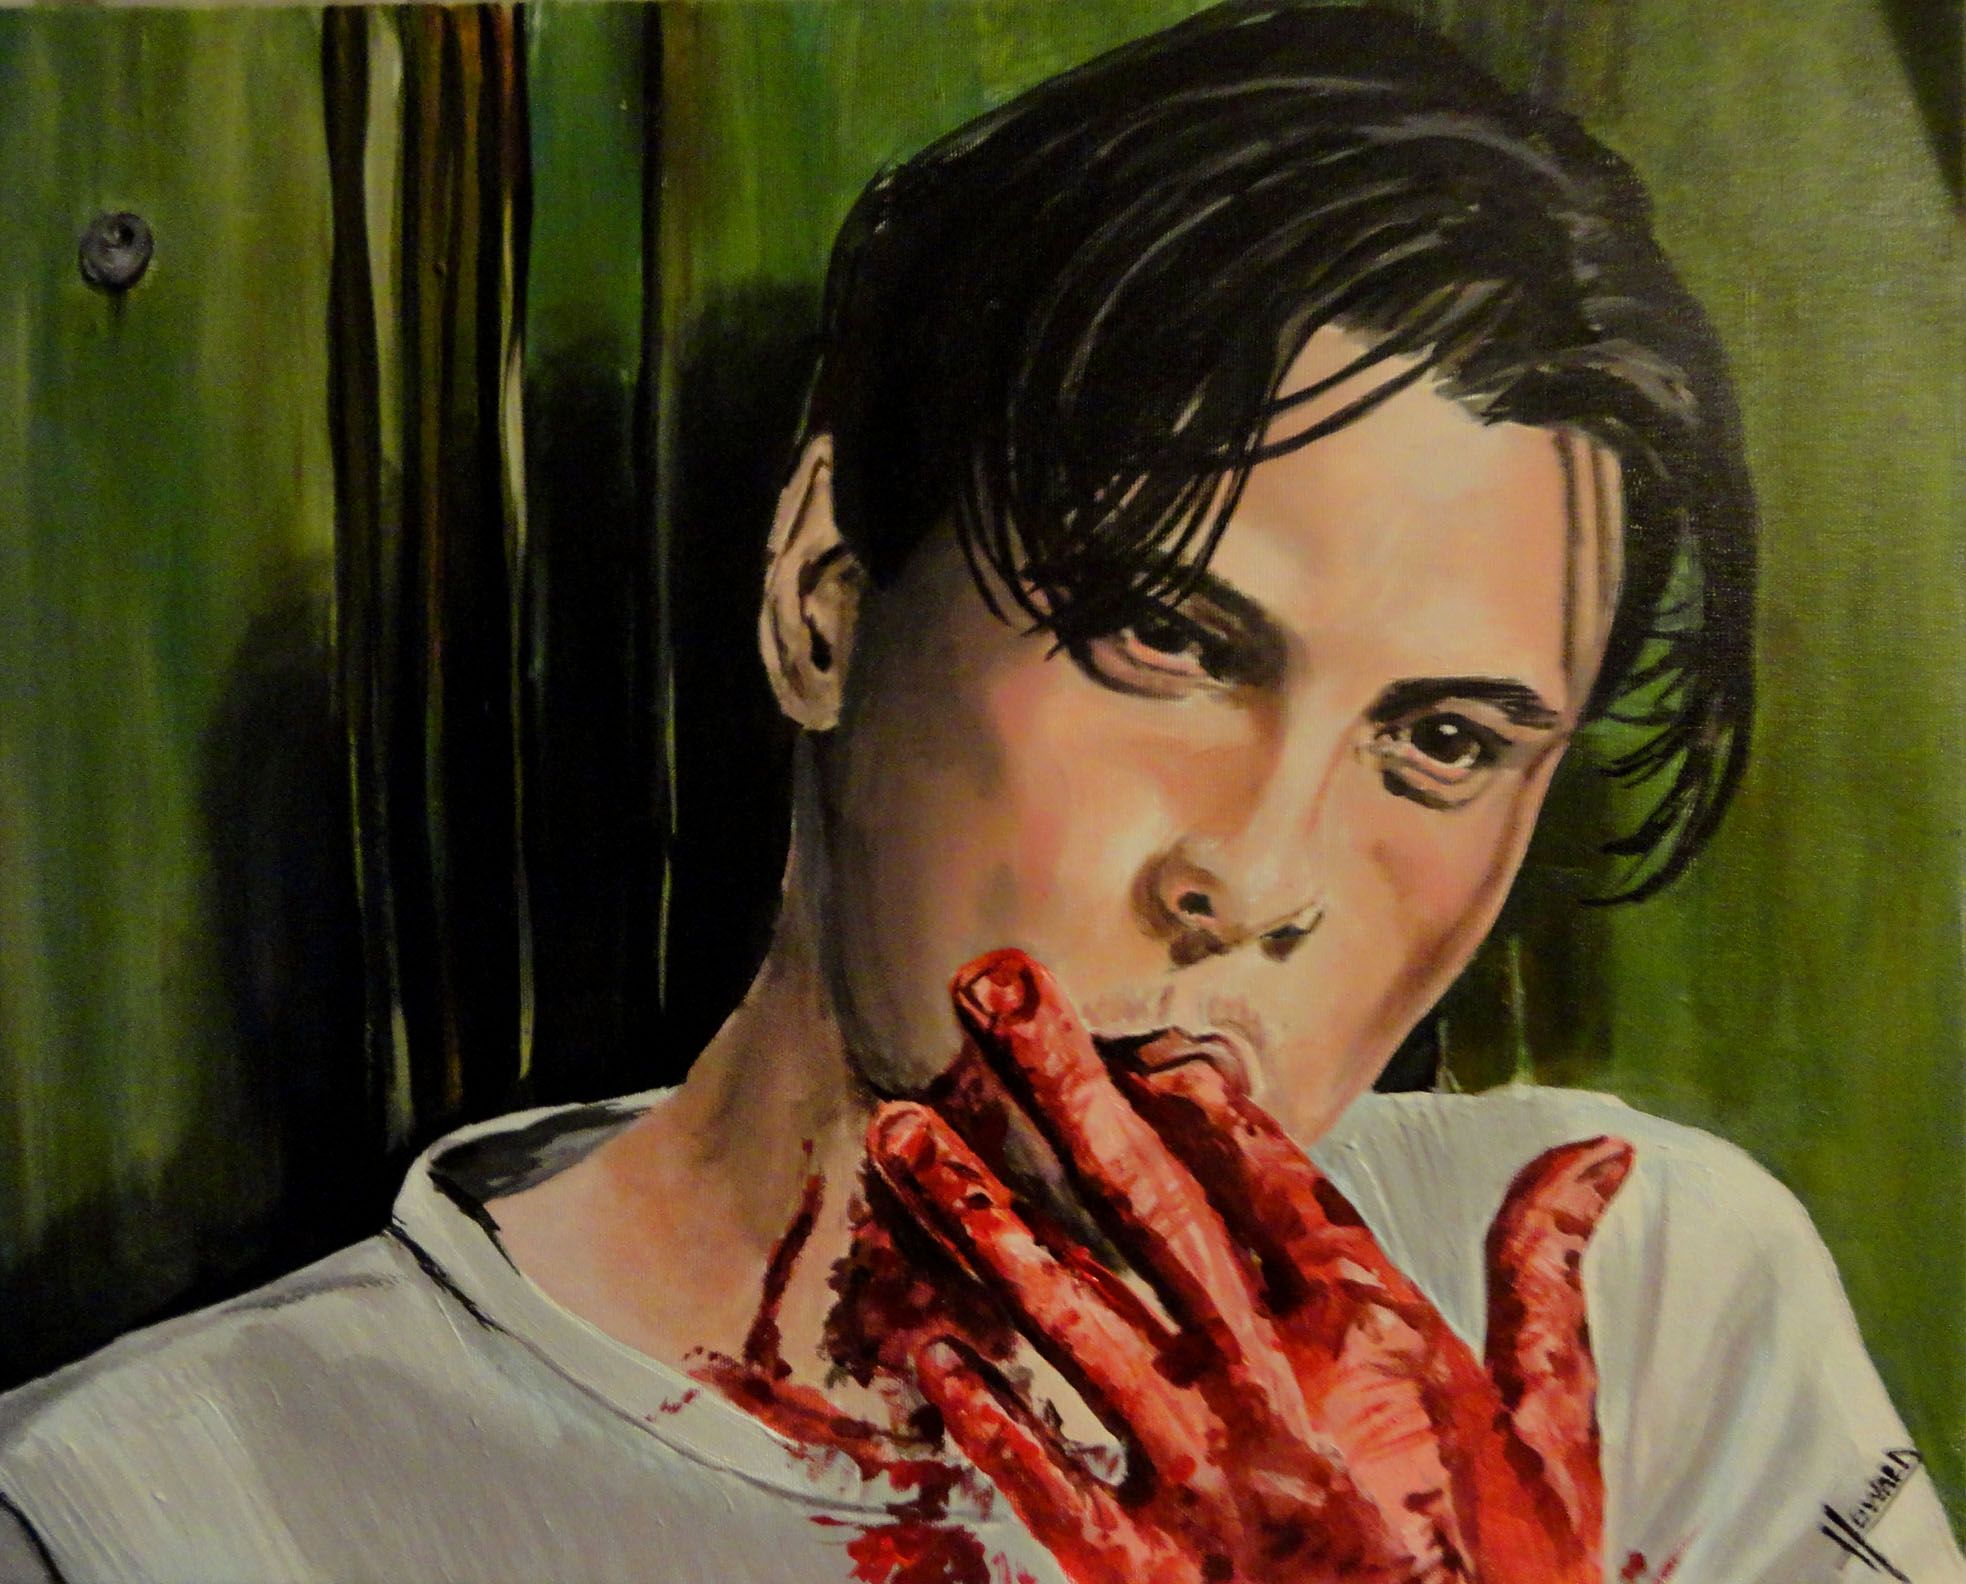 Billy Loomis Ulrich from Scream. Scream movie, Horror icons, Scary movies